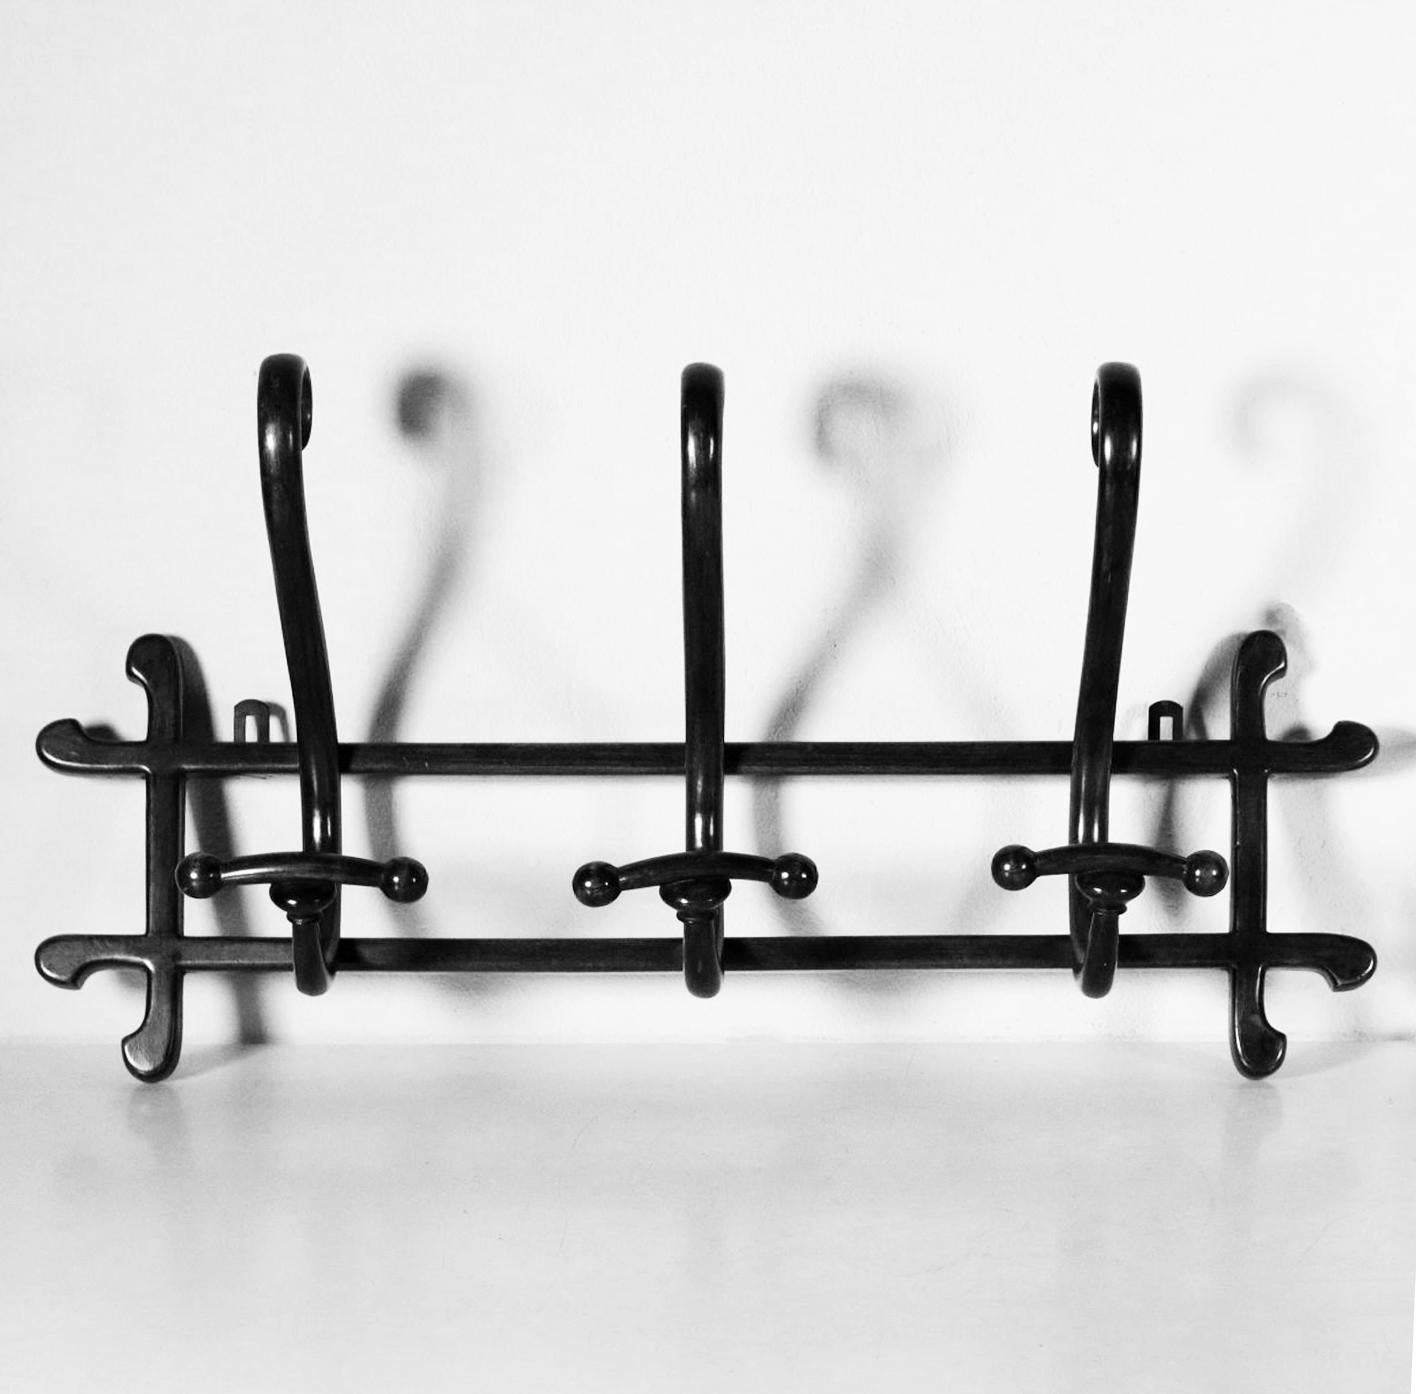 Has the original Thonet stamp

 Thonet, Vienna/ 1906 Catalogue

Thonet original wooden coat rack made of black wood with, it has 3 hangers to hang coats and 5 upper ones for hats
Has the original Thonet stamp
 
It is in very great